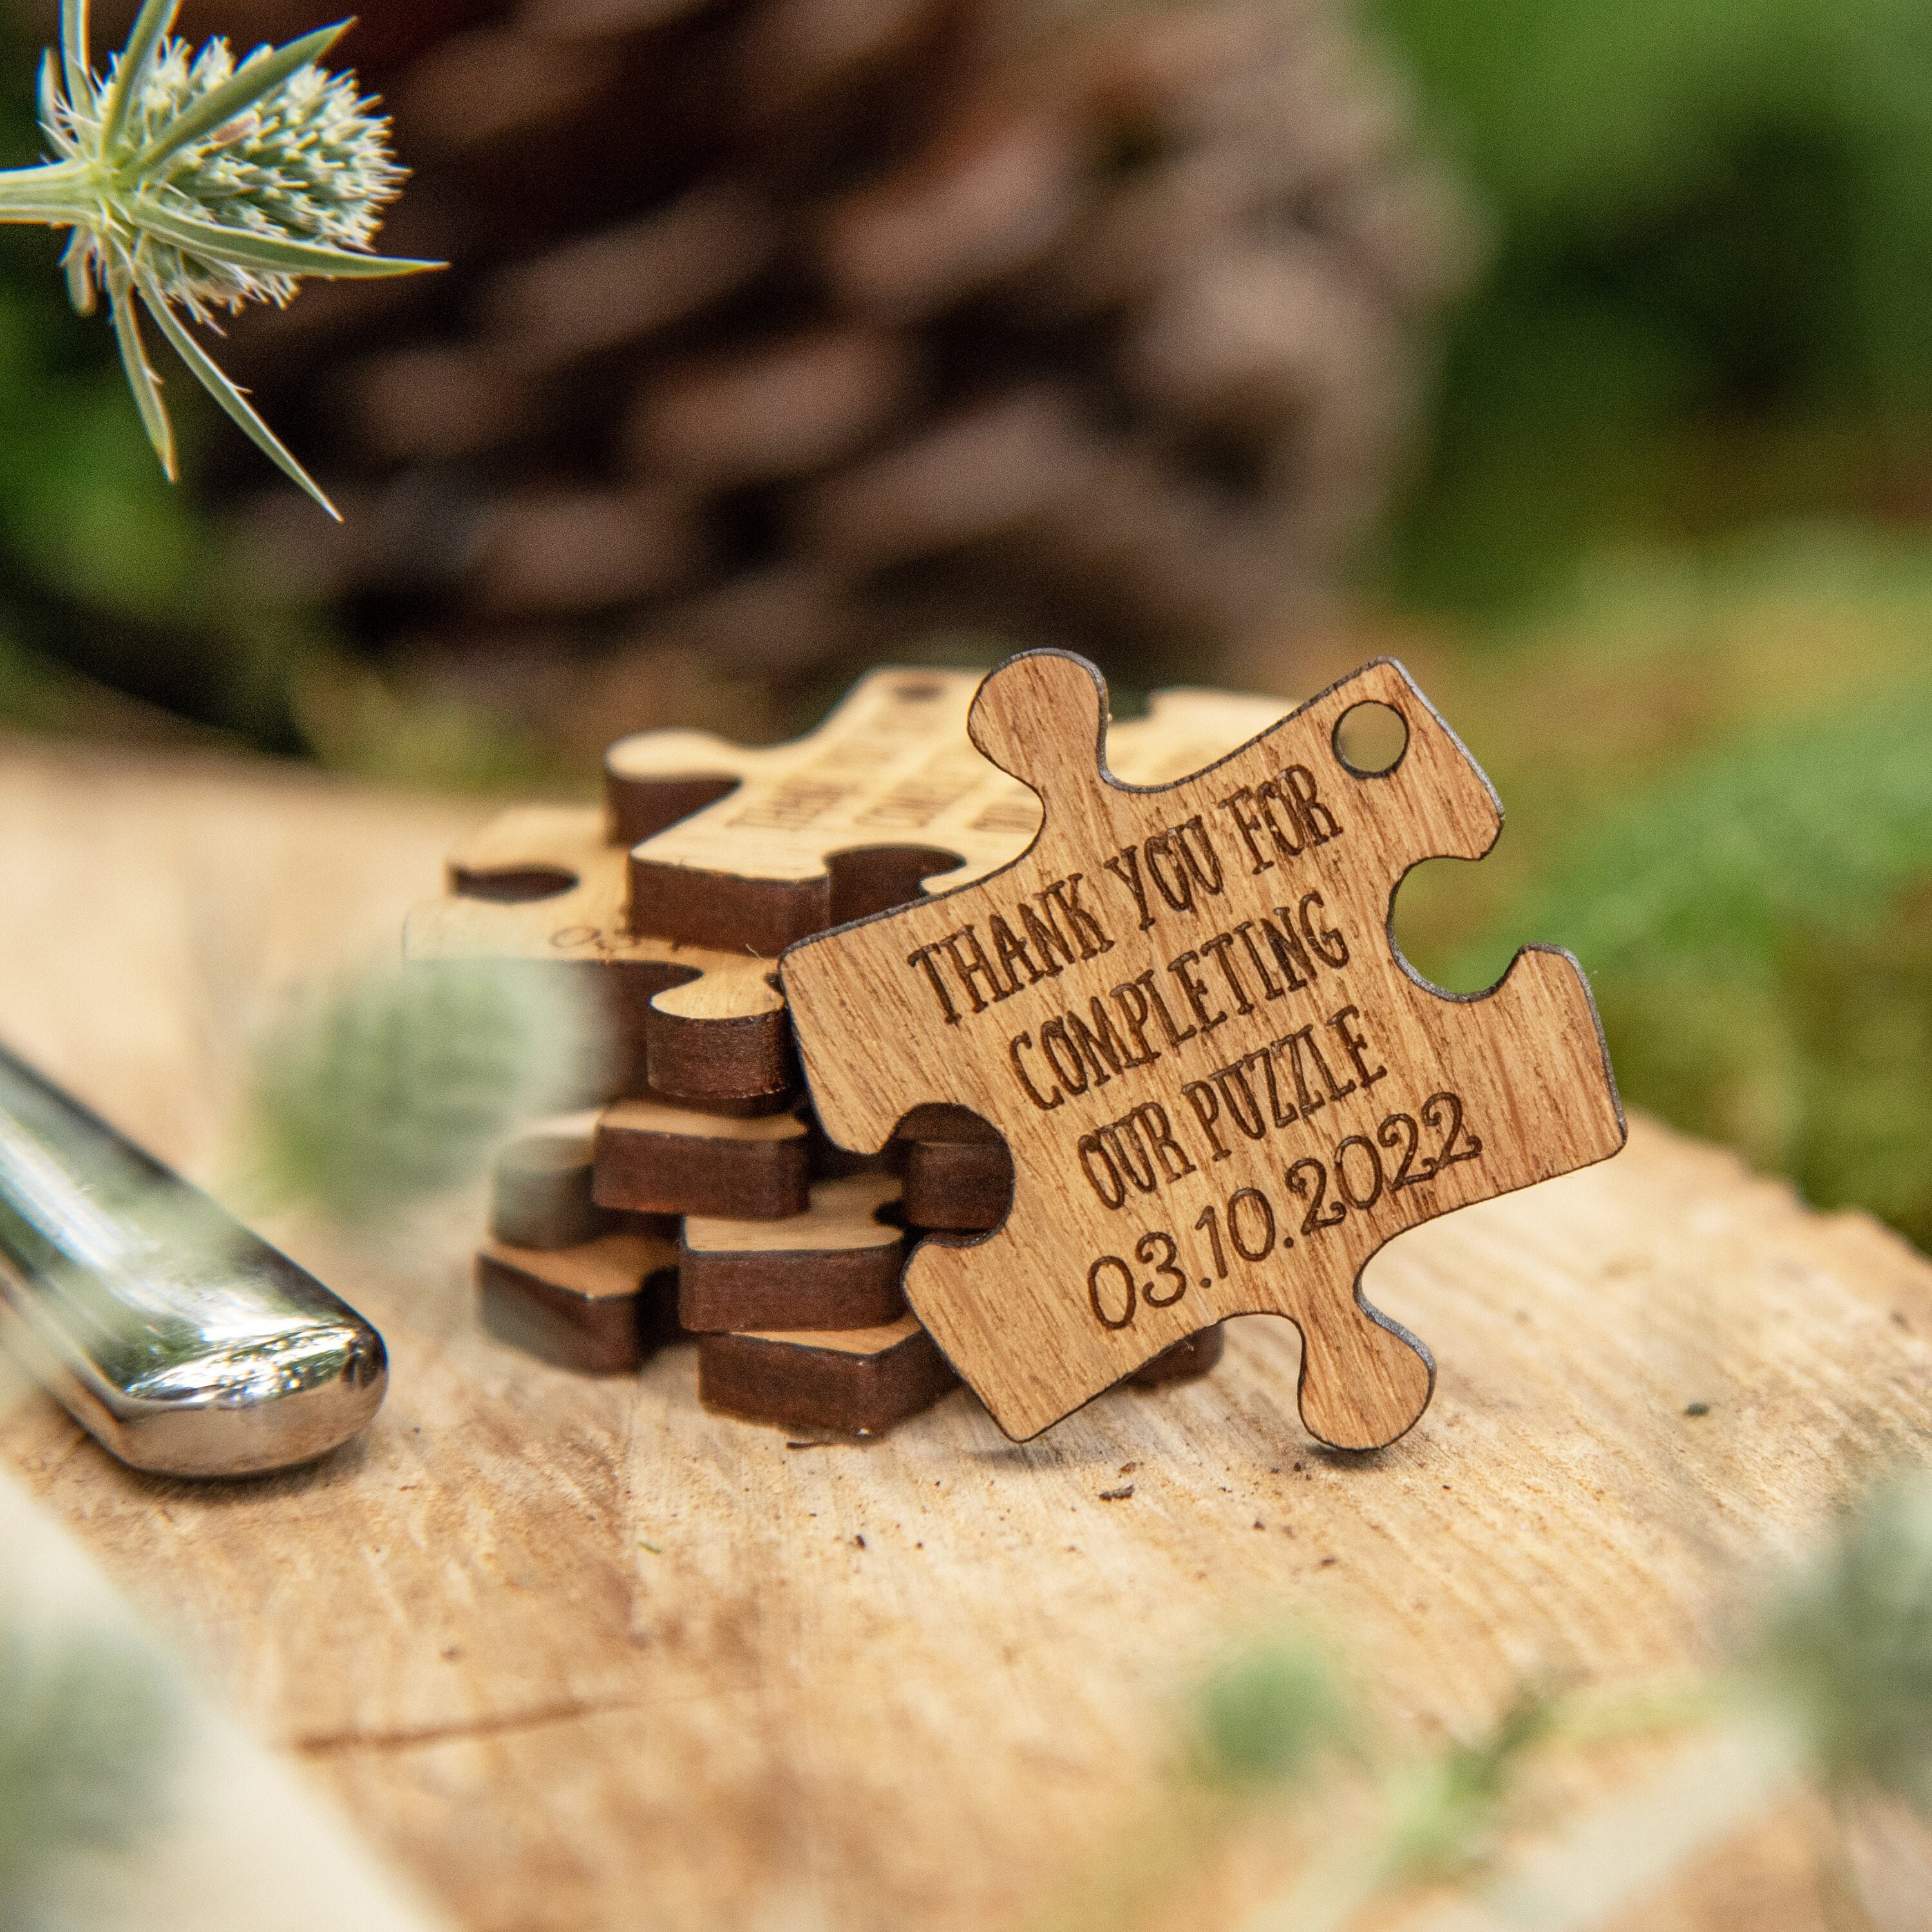 Custom Wedding Favors - Puzzle Favors - Puzzle Piece Favors - Puzzle Decor - Puzzle Decorations - Puzzle Pieces - Wedding Table 10TD